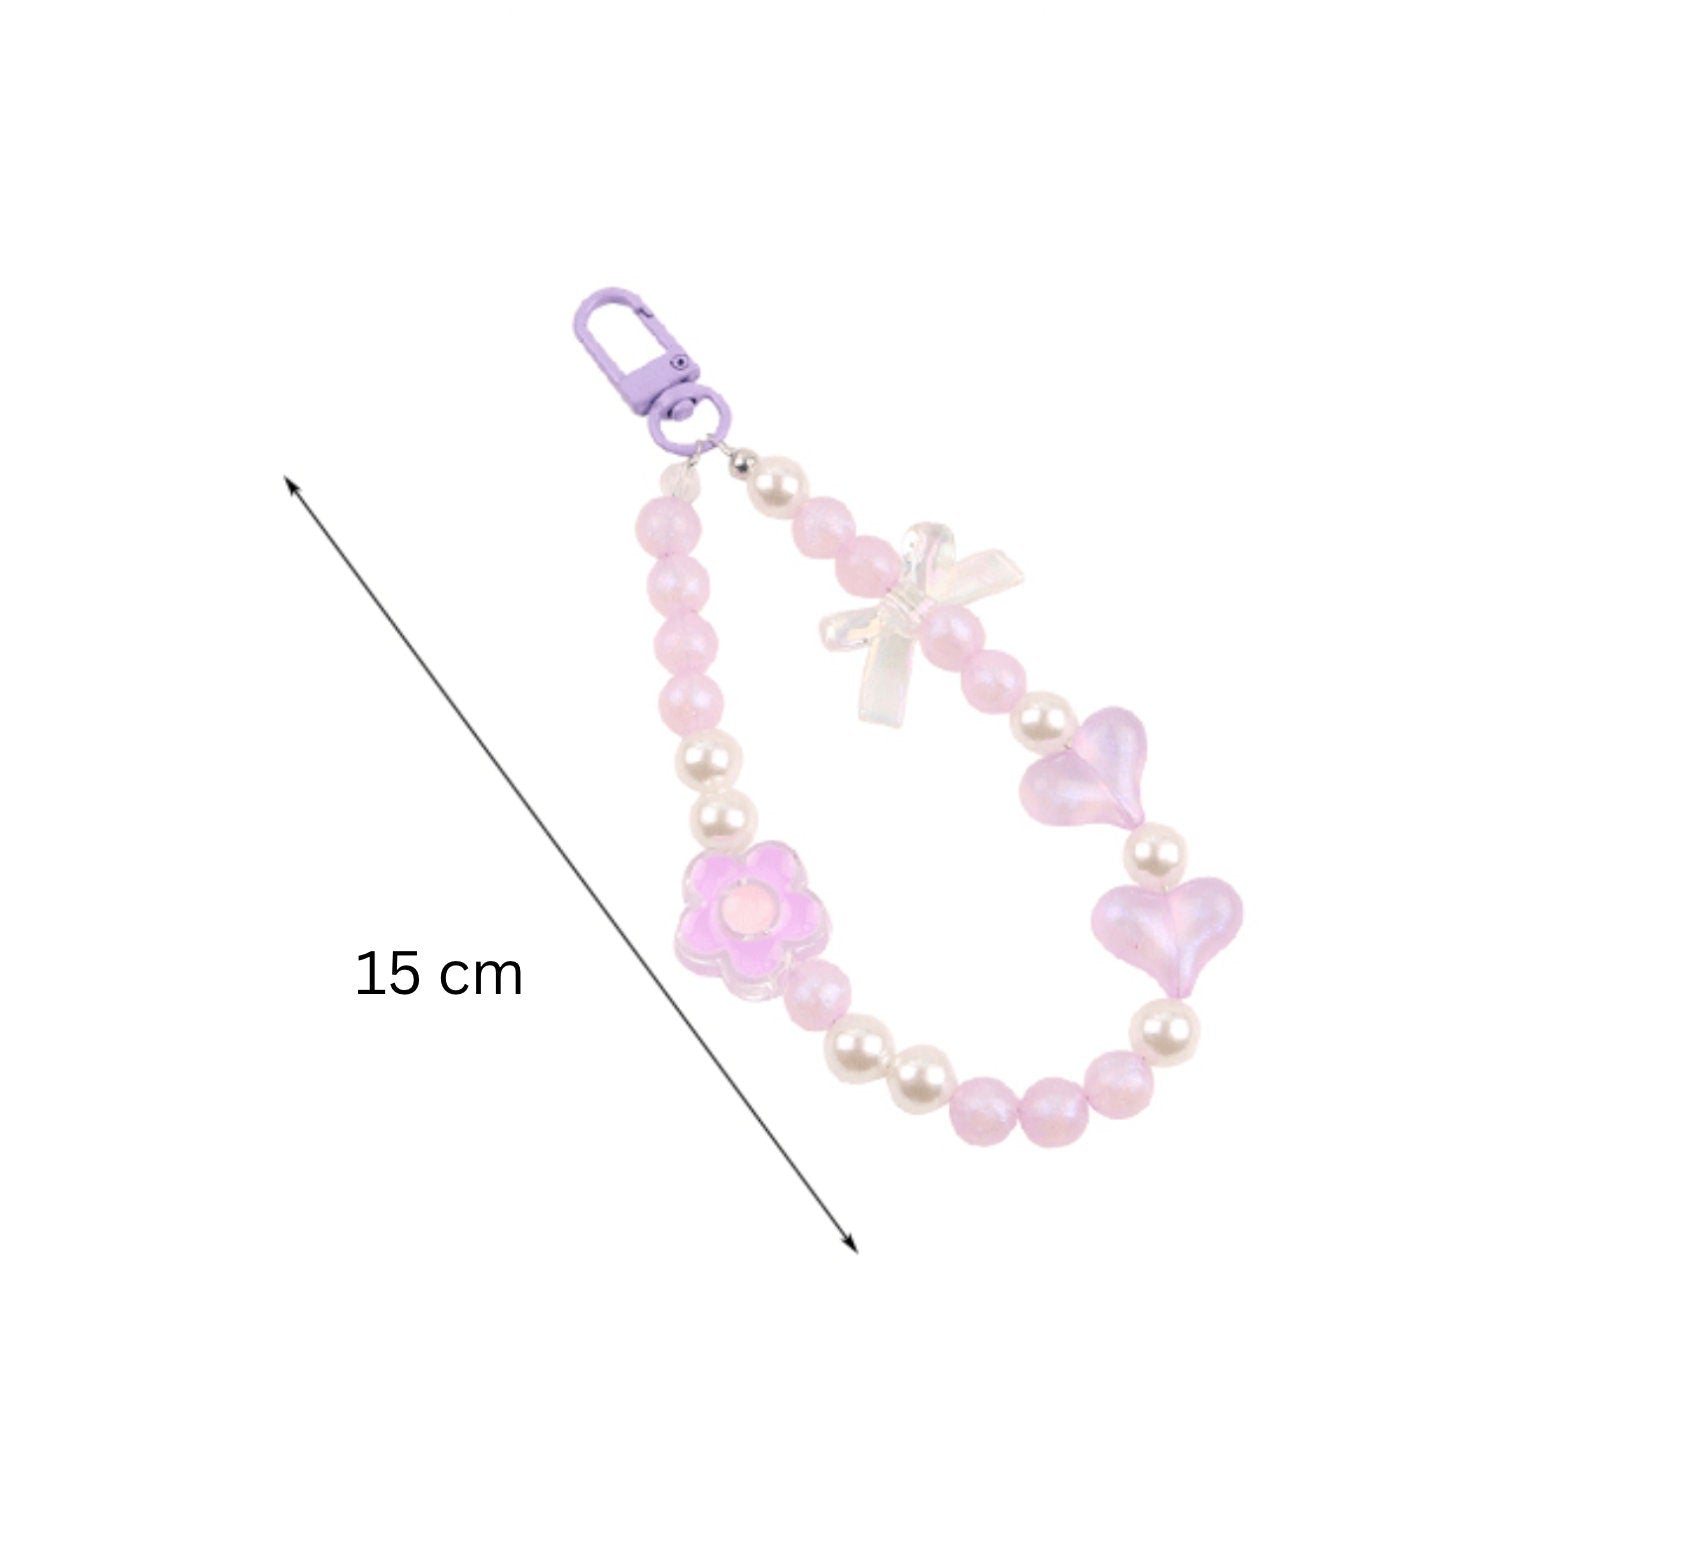 15CM Cute Acrylic Round Bead Strand with Flowers and Bows Bead Keychain, Key ring, Phone Lanyard